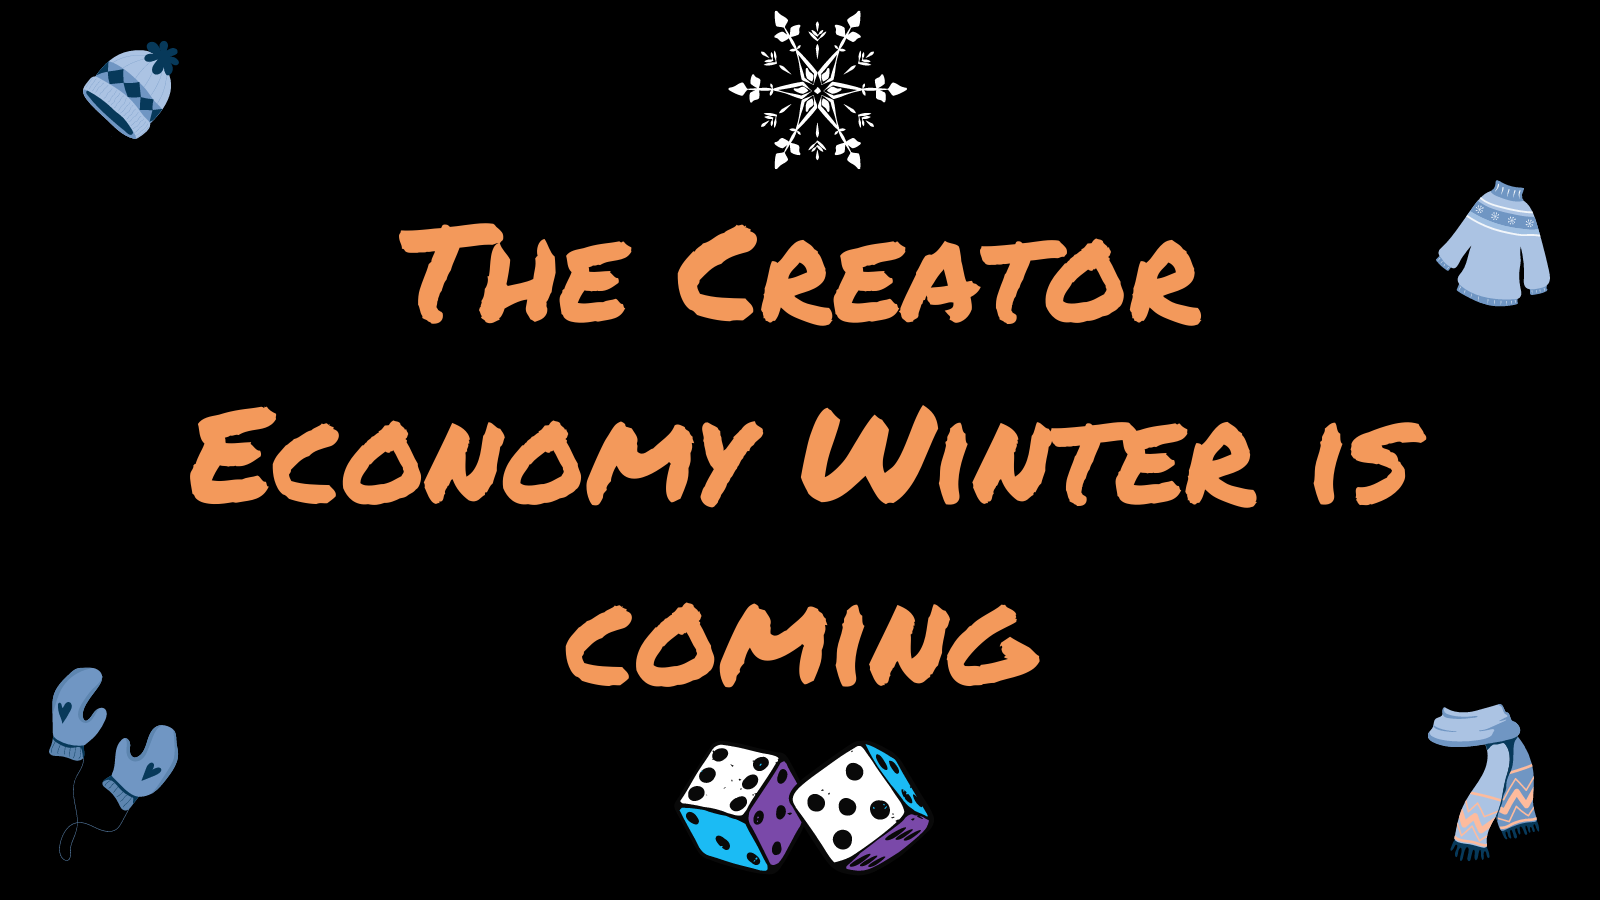 ❄️ The Creator Economy Winter is coming (And what I’m doing about it)